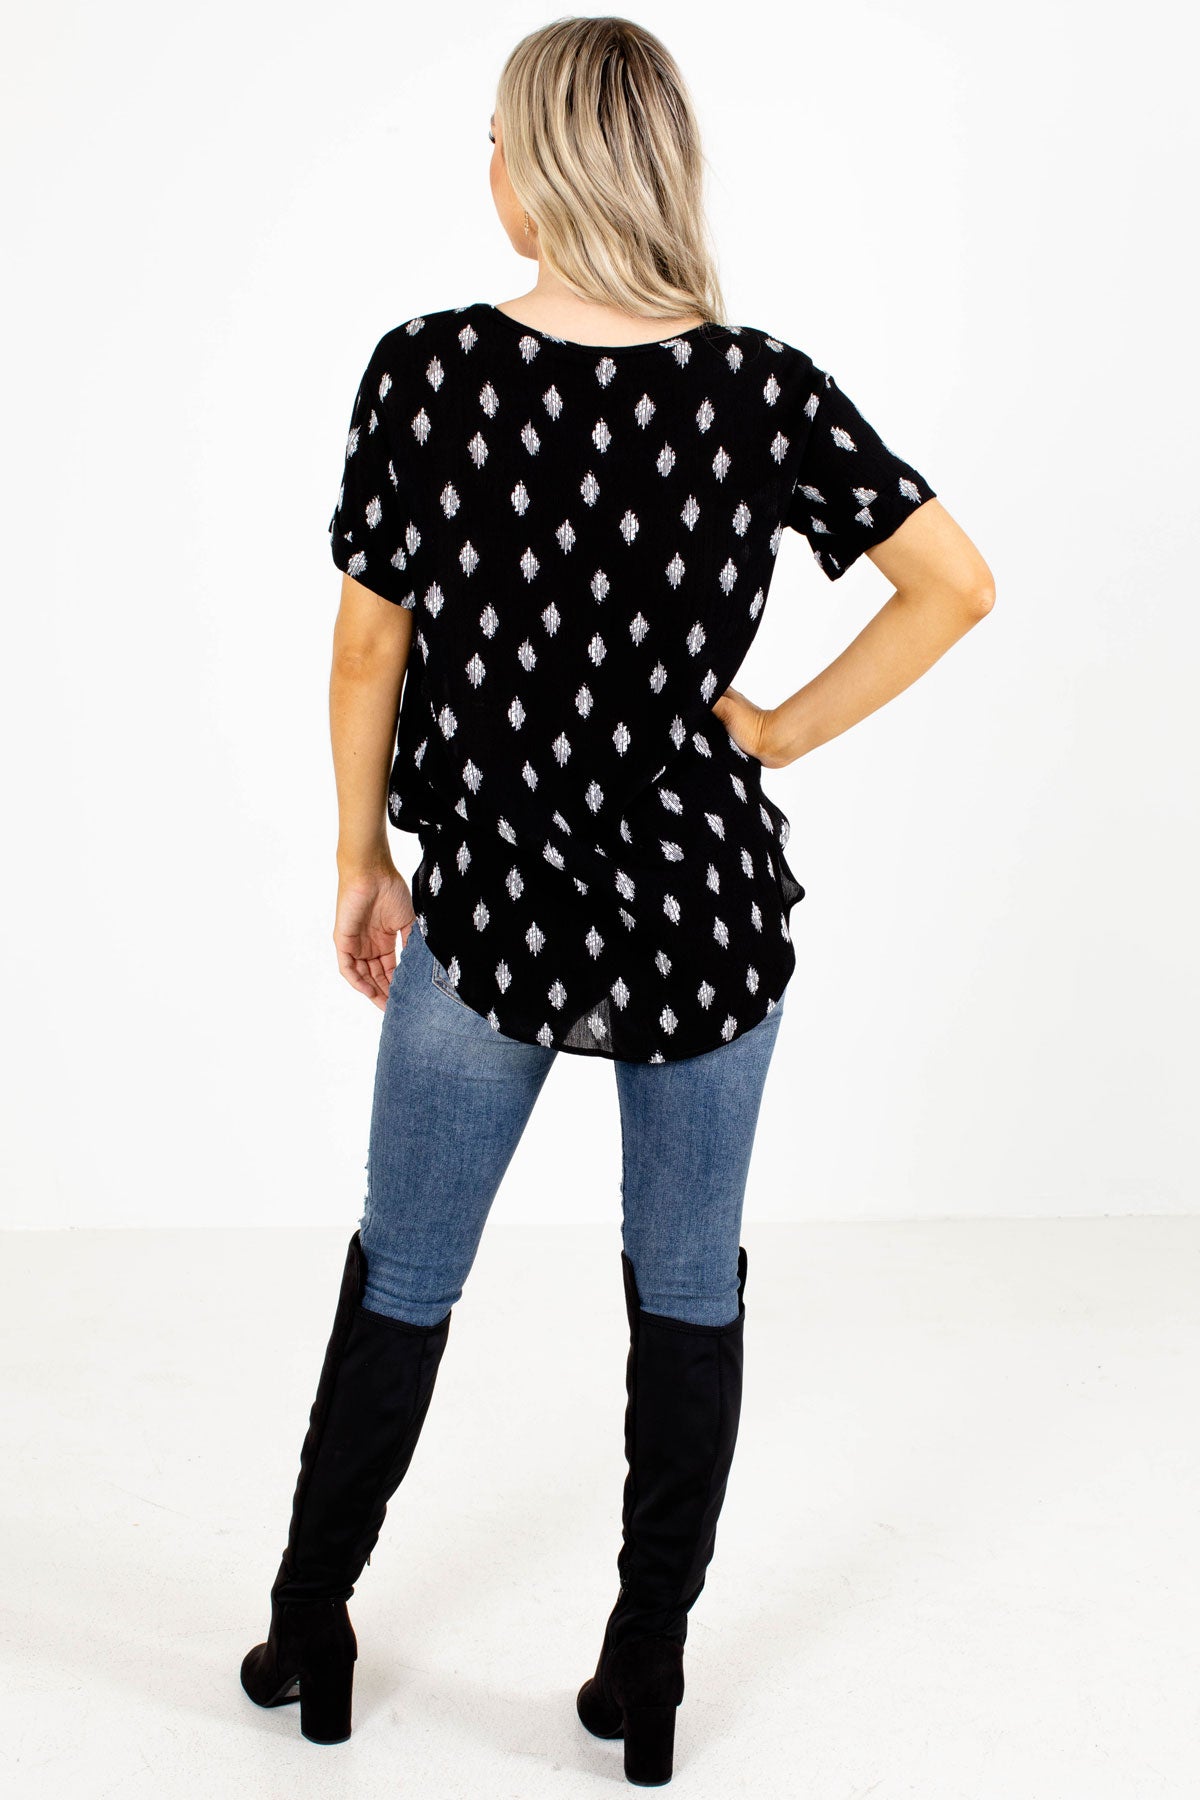 Women's Black Top with Pattern